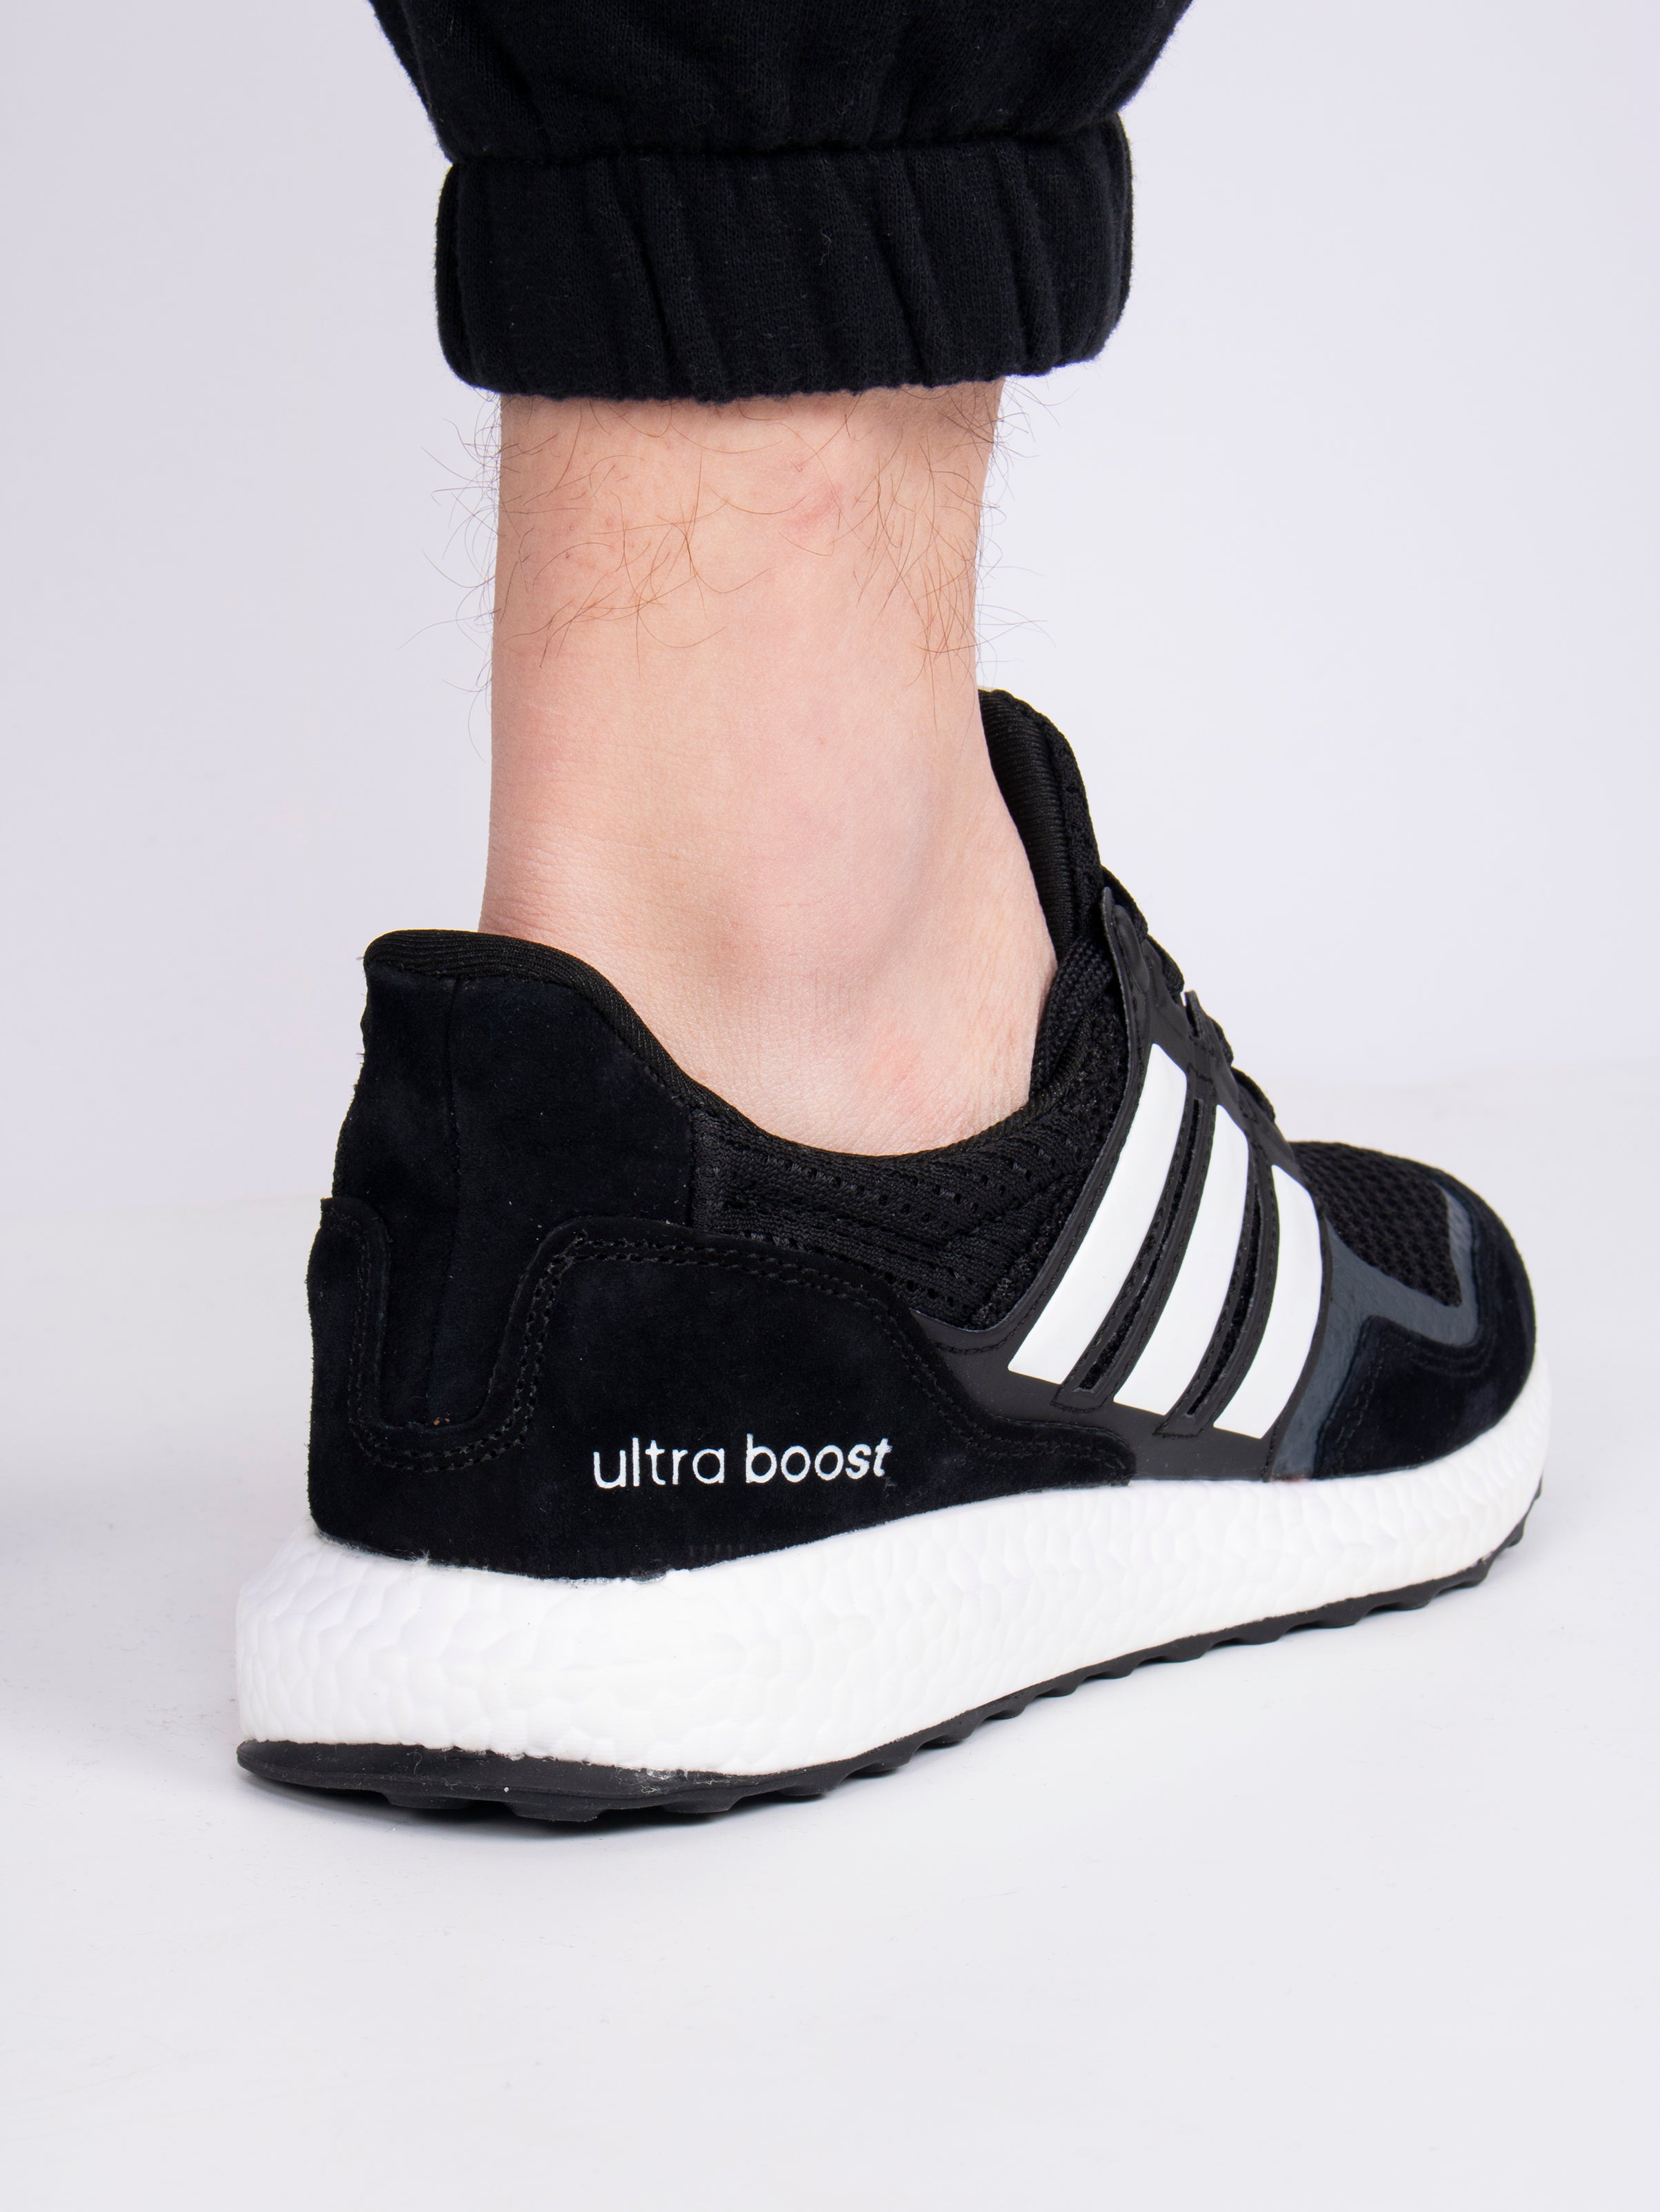 Adidas Ultra Boost Black and White